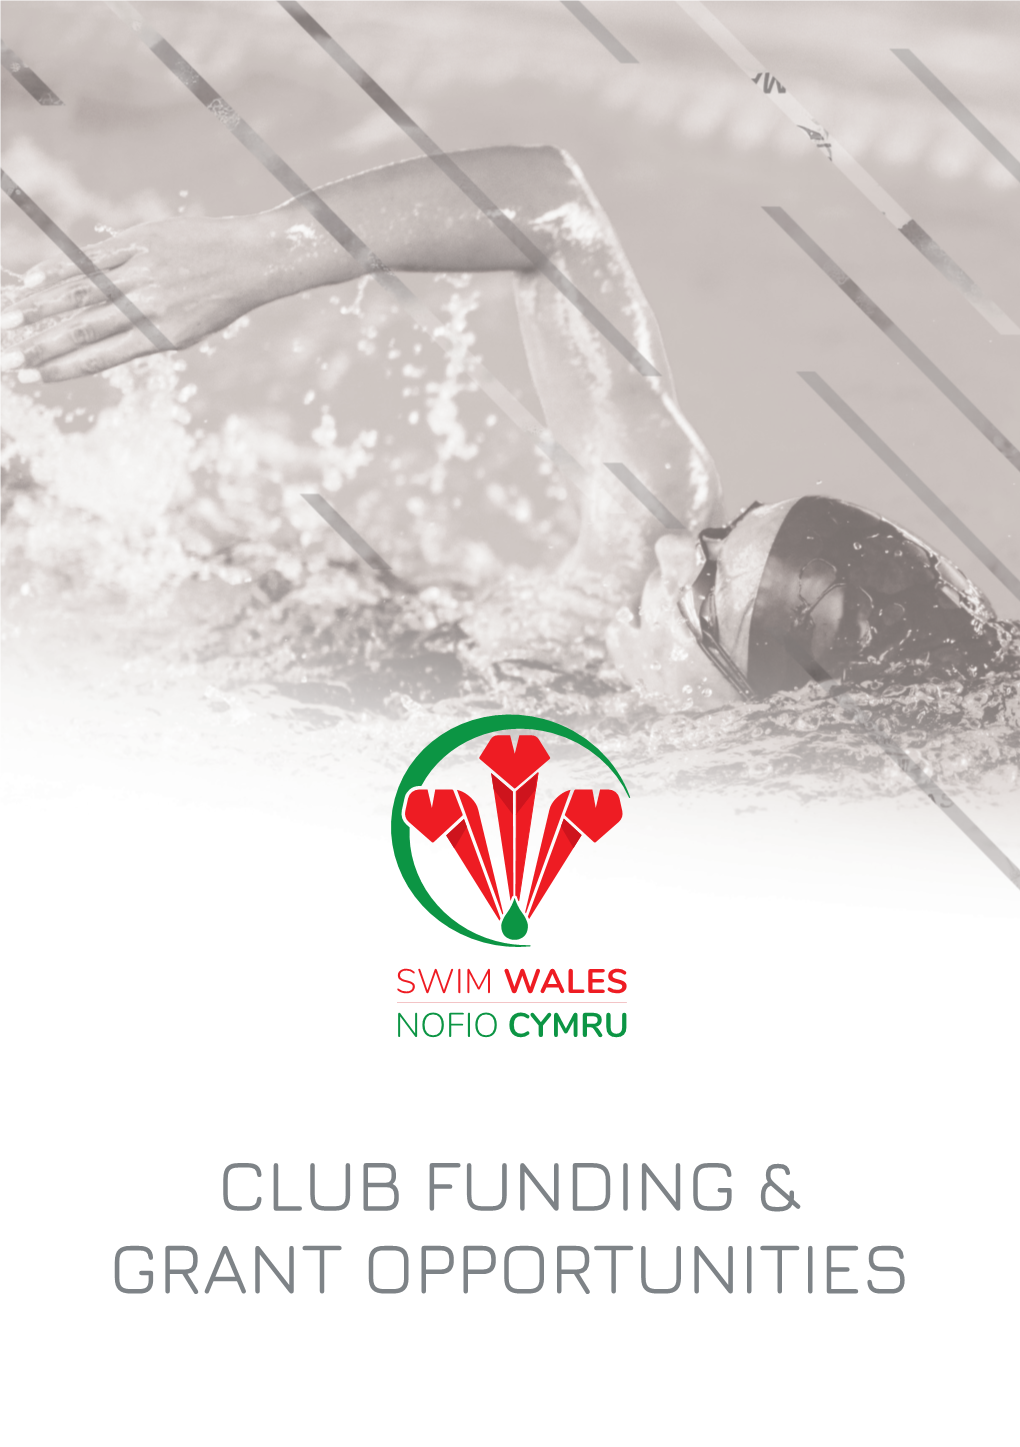 Club Funding & Grant Opportunities